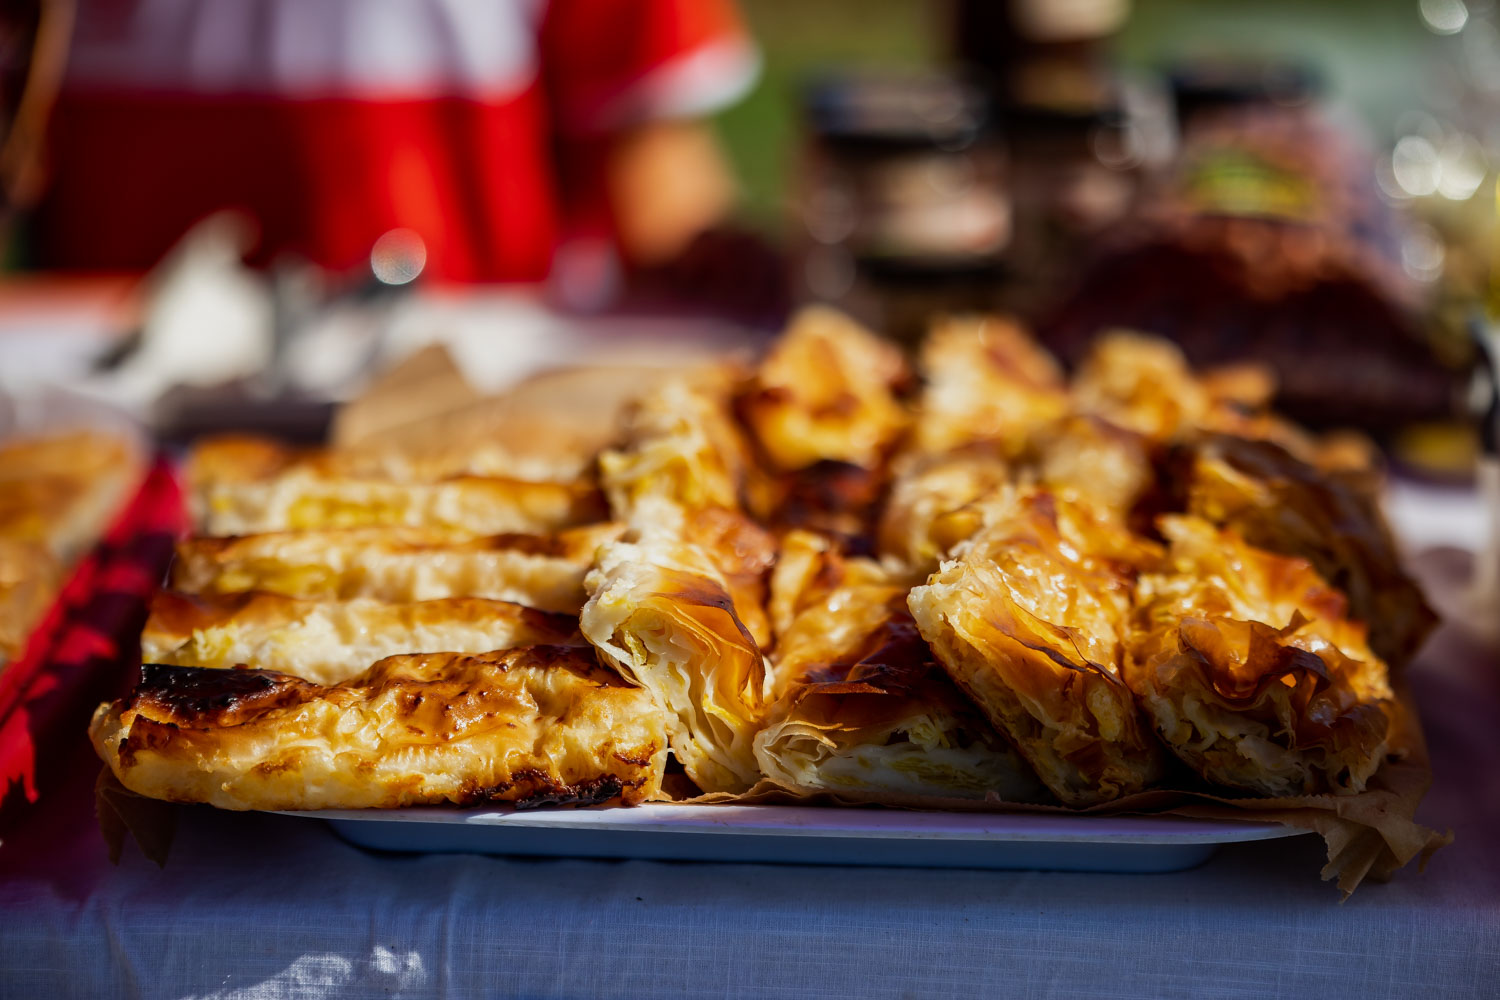 Thousands turn out as Croatian strudel fest opens